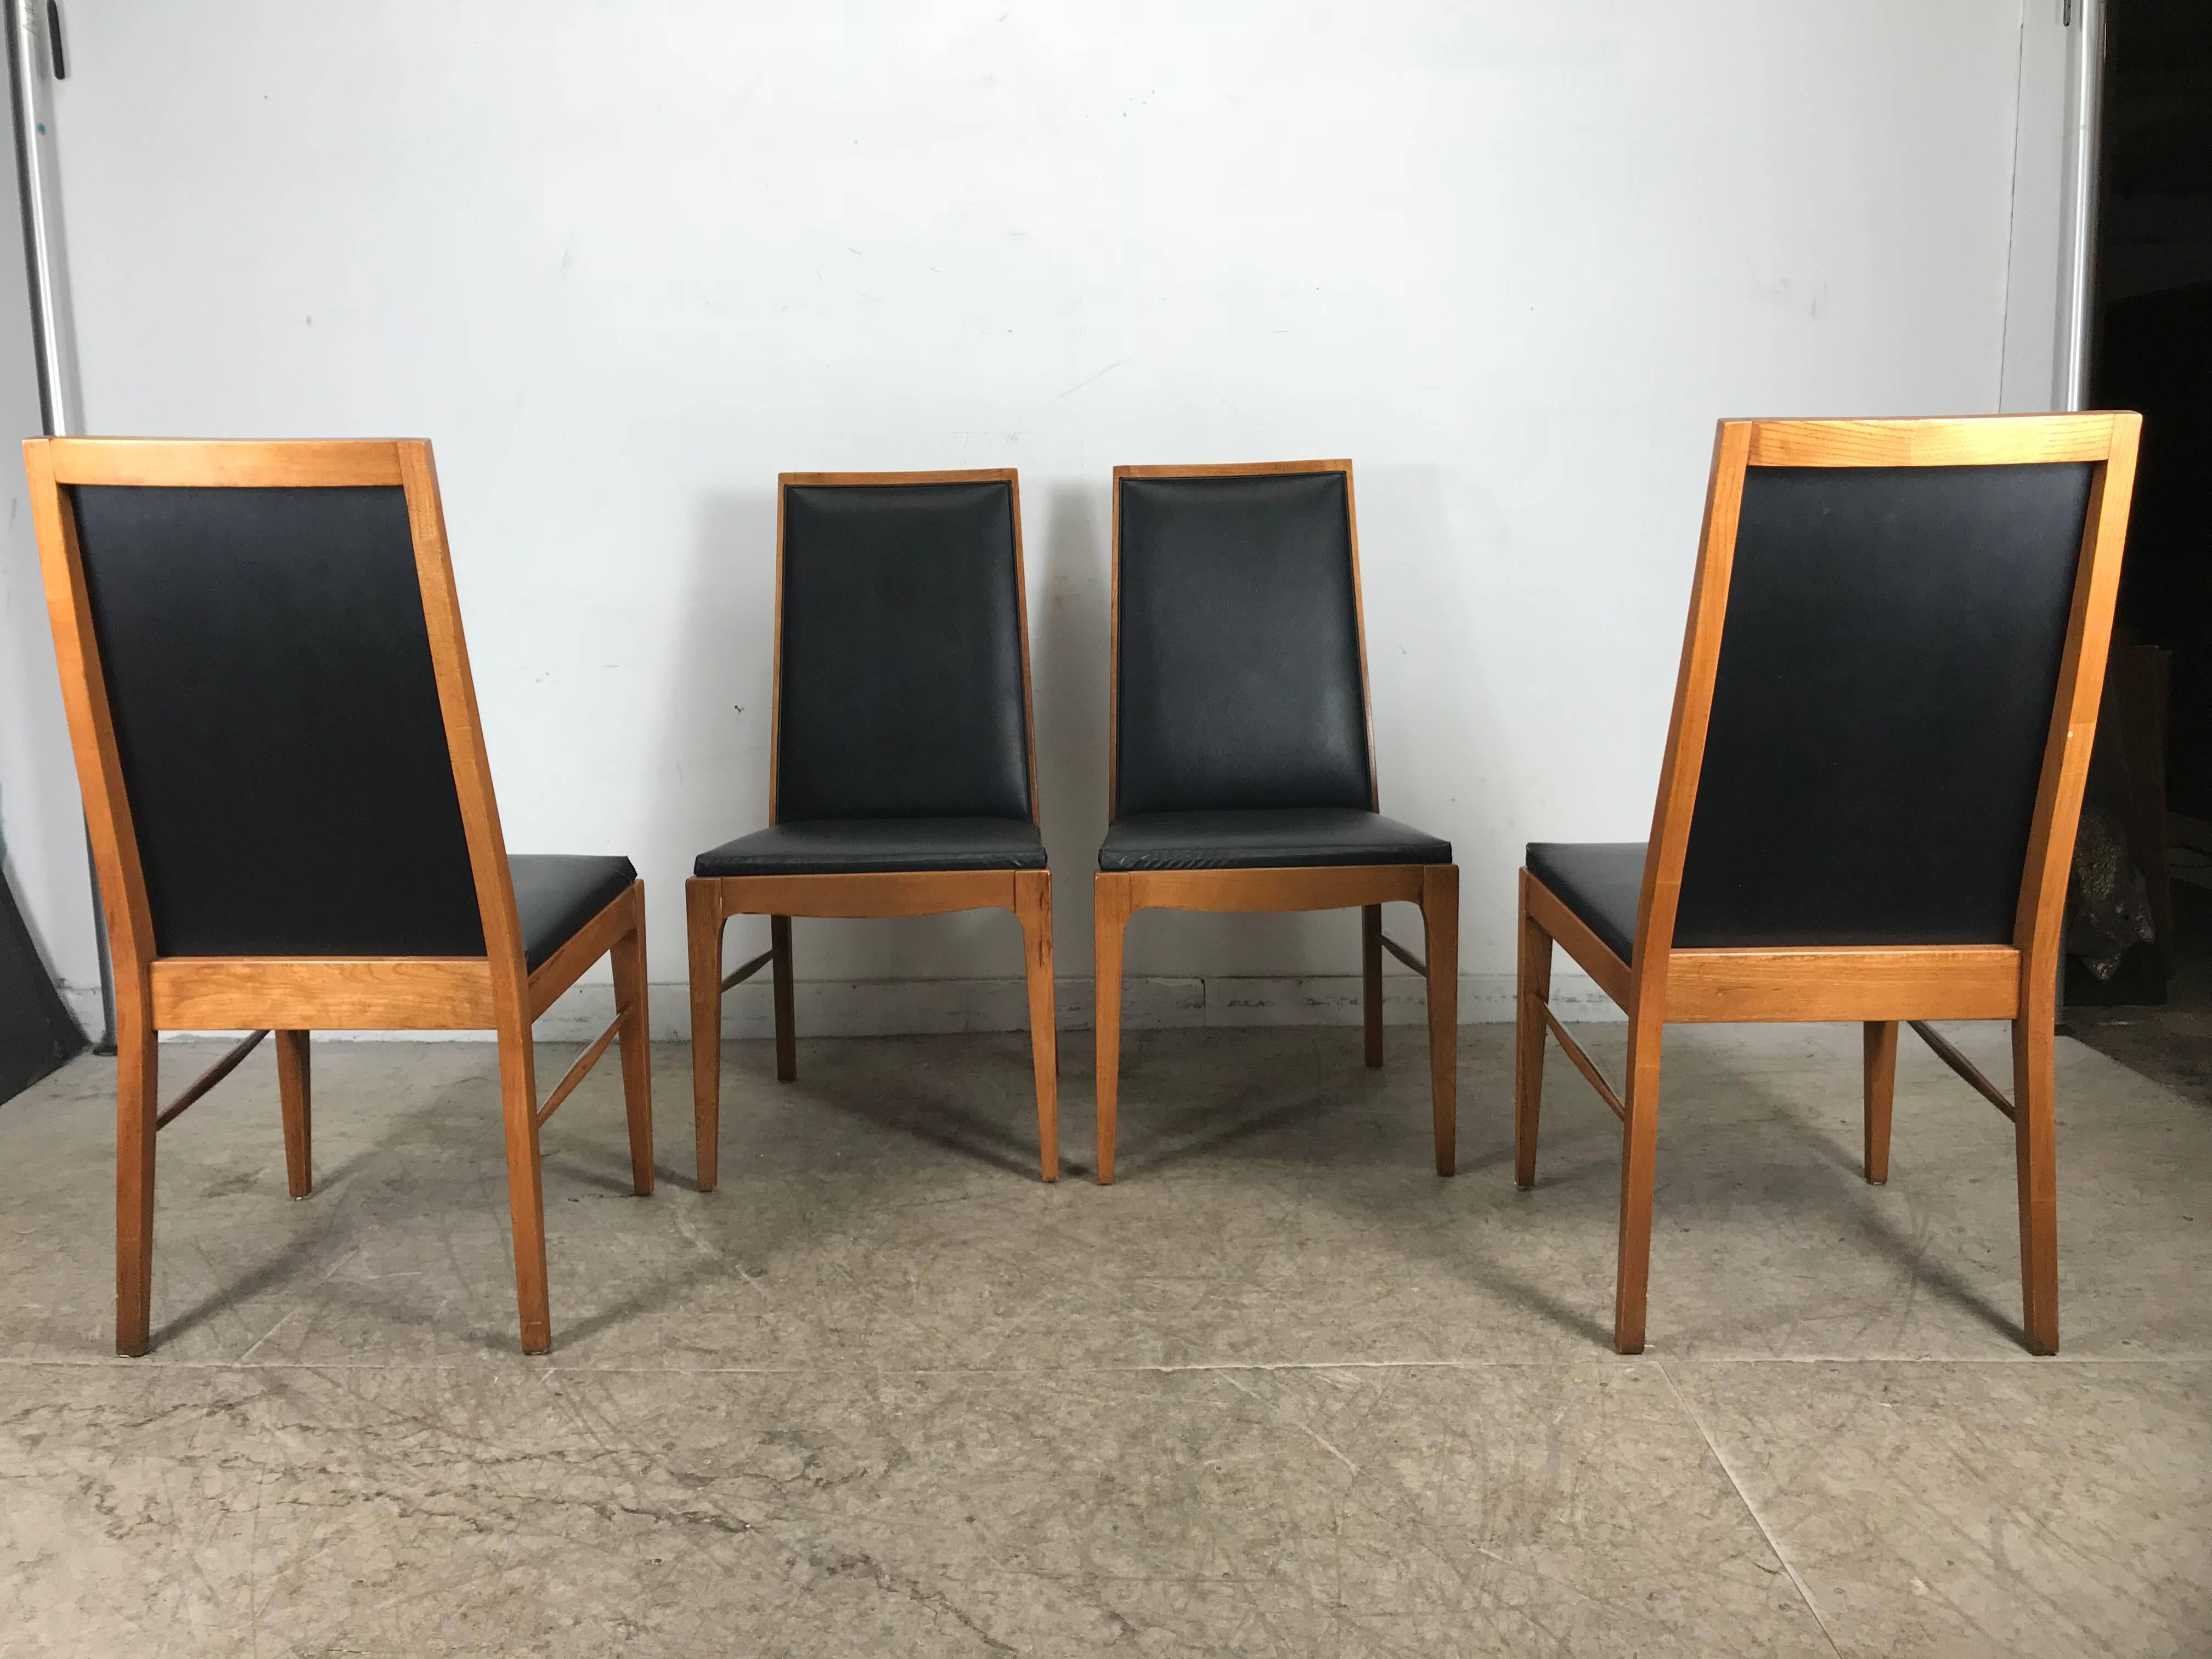 American Set of Four Modernist Walnut Dining Chairs by Lane For Sale